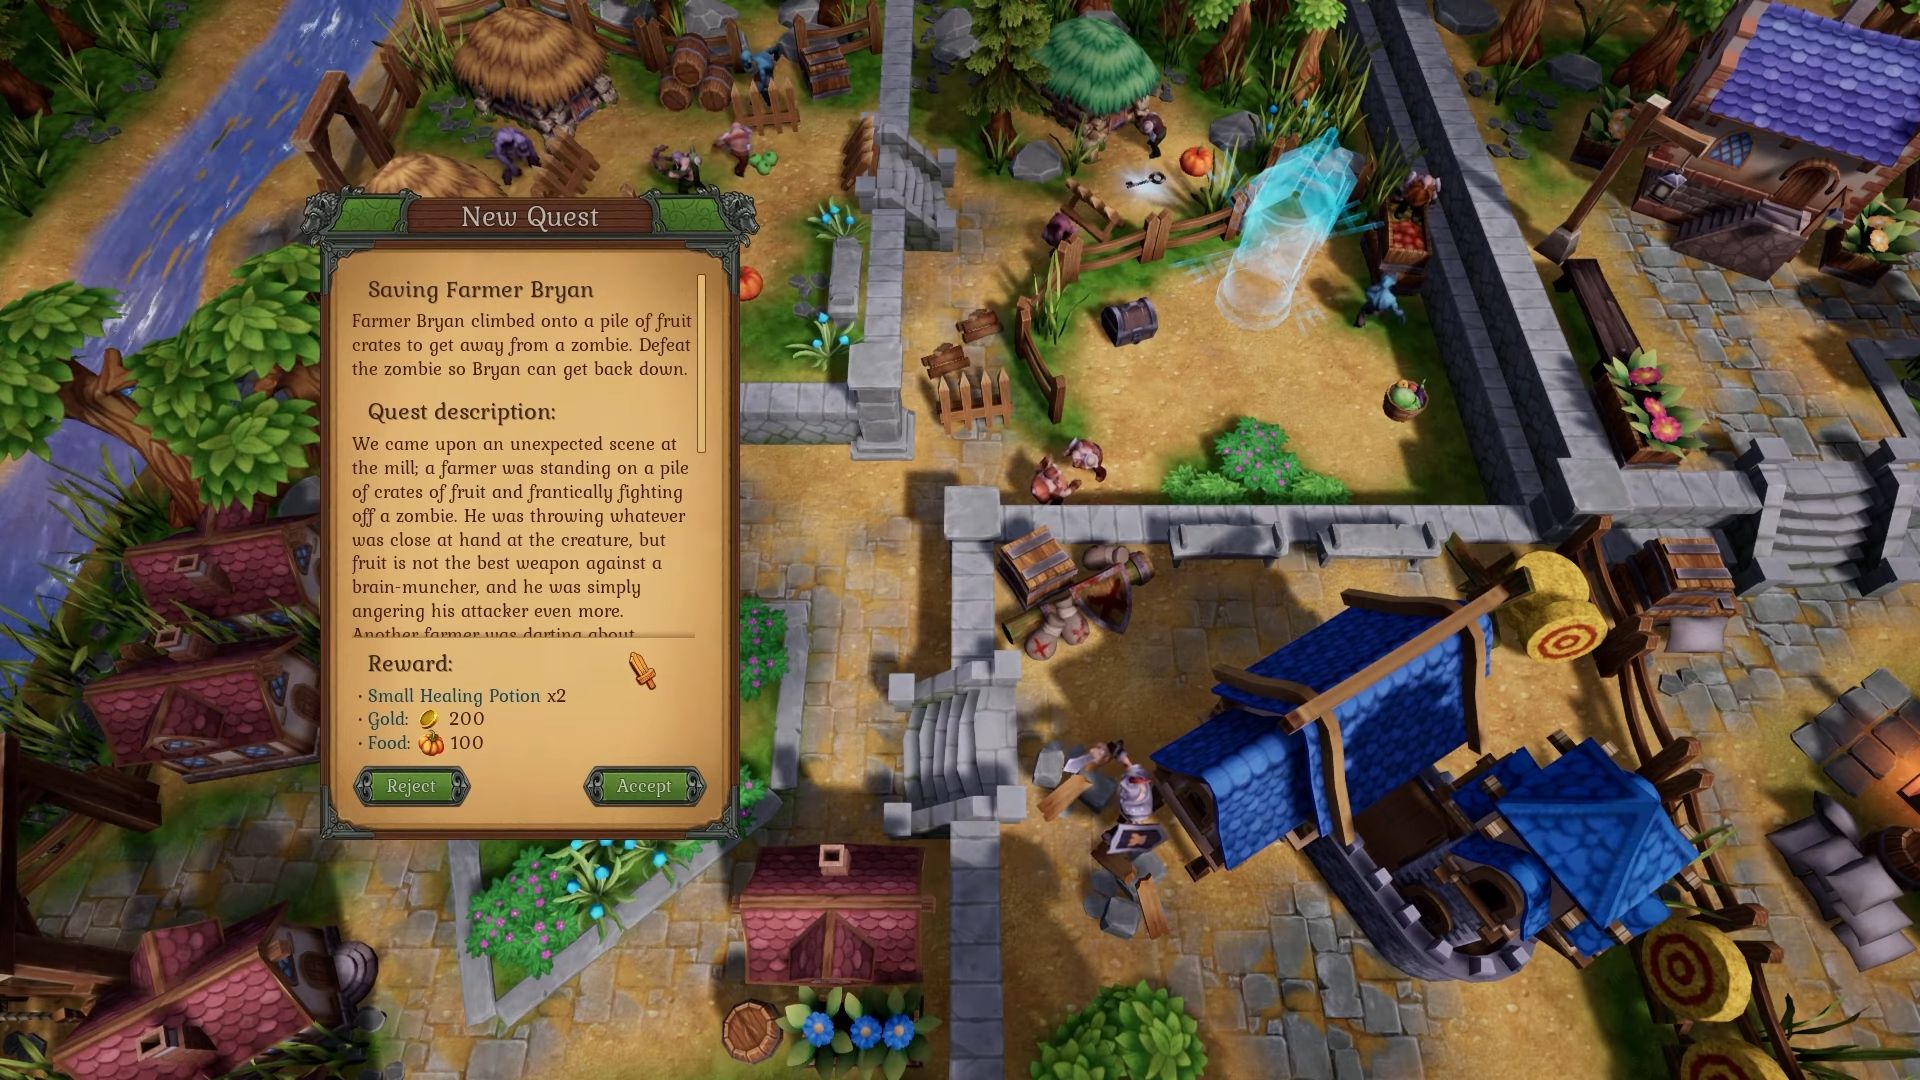 Ladda ner The Unexpected Quest: A Great Adventure: Android RTS (Real-time strategy) spel till mobilen och surfplatta.